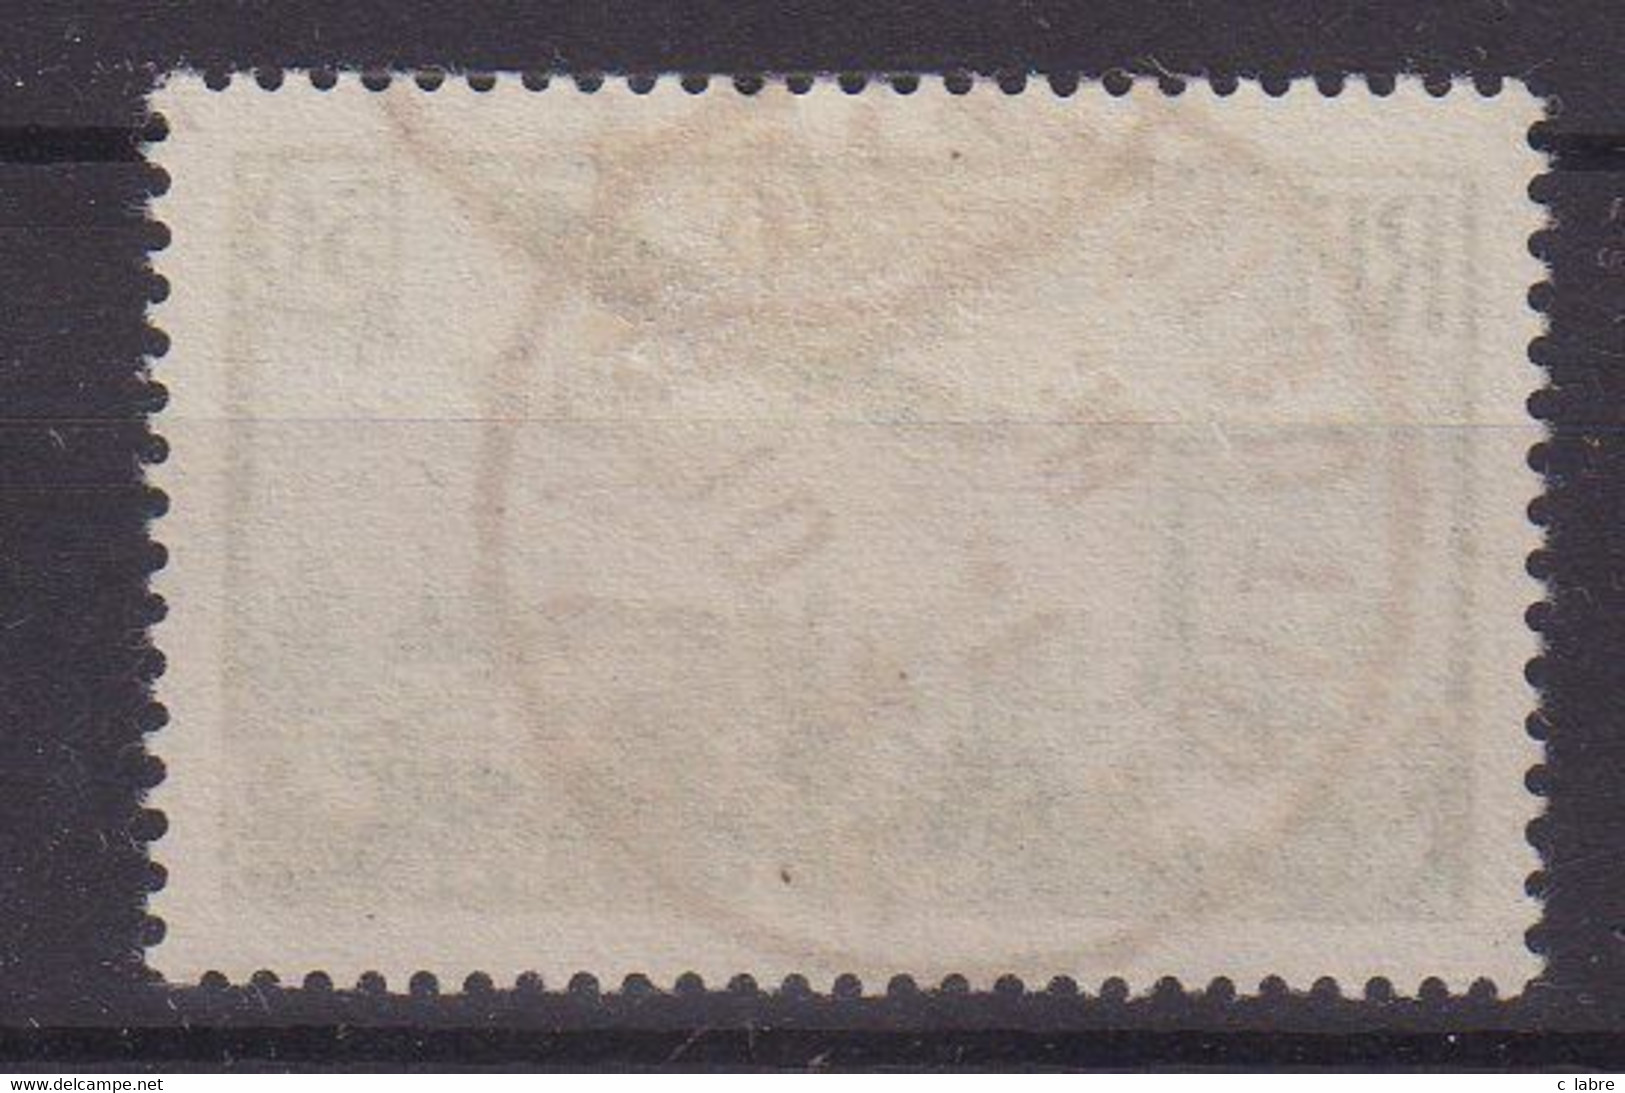 FRANCE : PA . N° 14 B . OBL CERTIFICAT A COHEN SABBAN  . 1936 . ( CATALOGUE YVERT ) . - Used Stamps